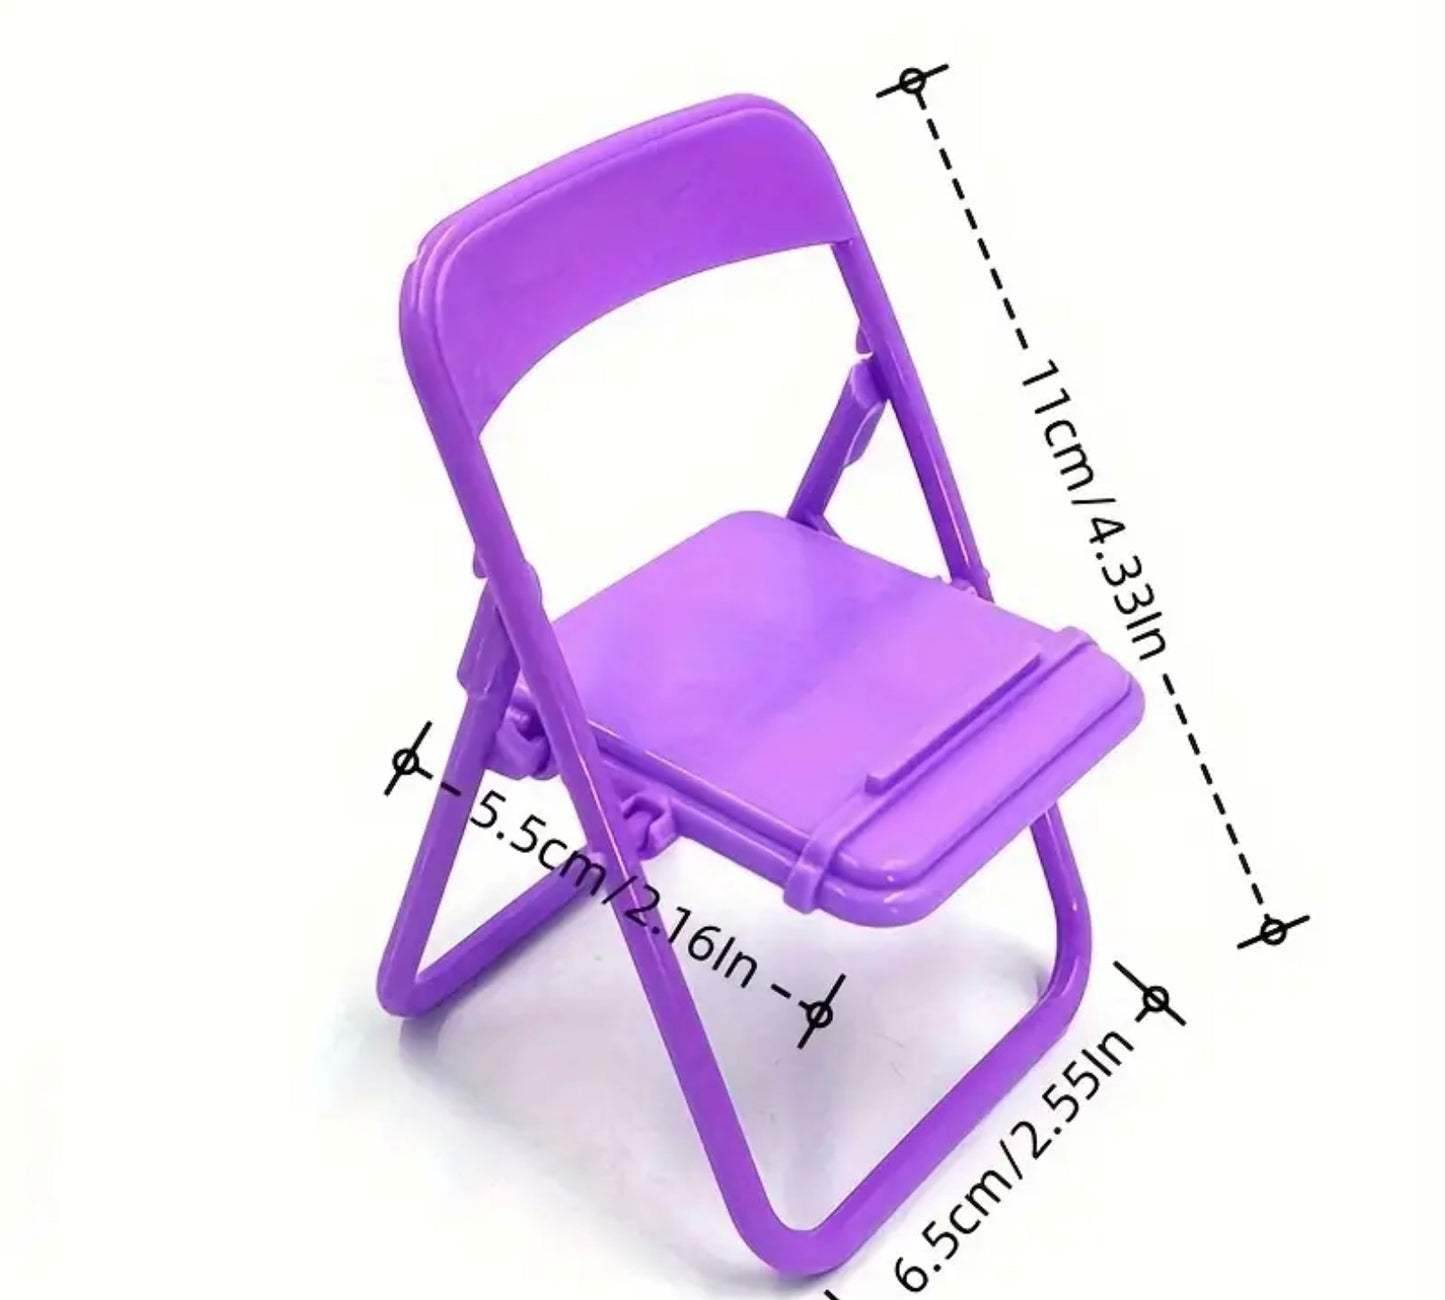 Folding chairs phone stand